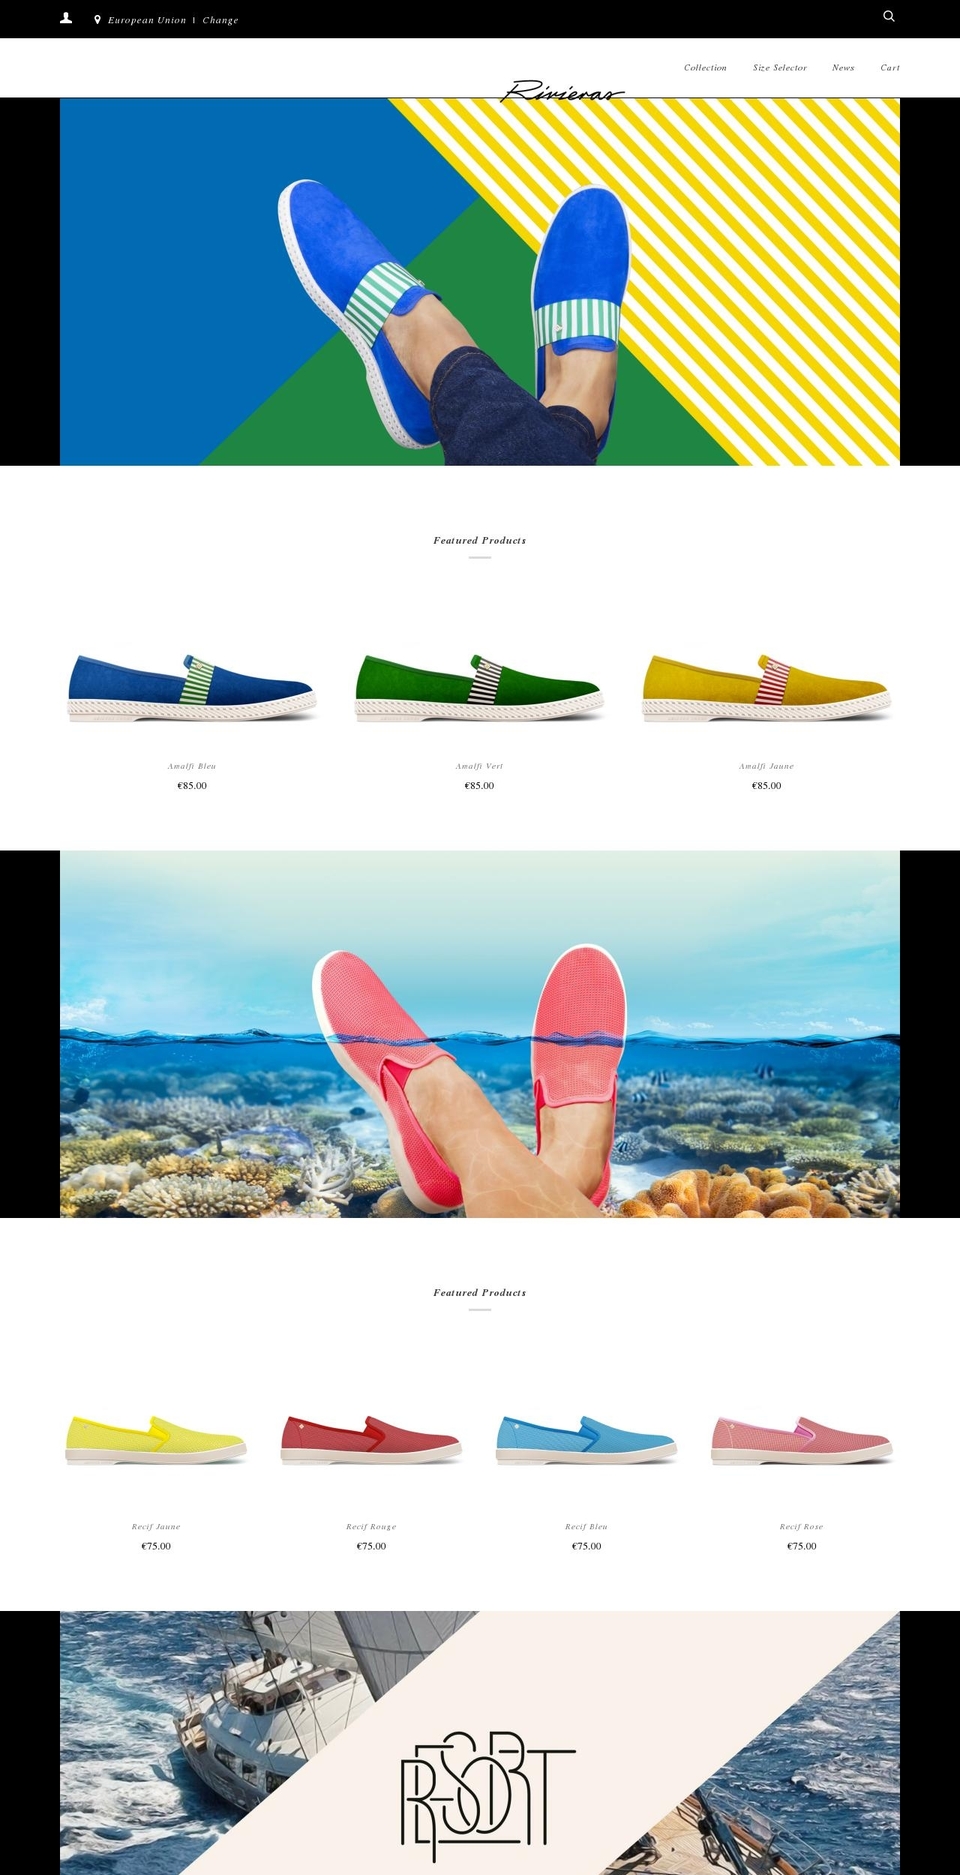 Rivieras [Plus]-TH-July-30-2018 Shopify theme site example rivieras-newsletter.com